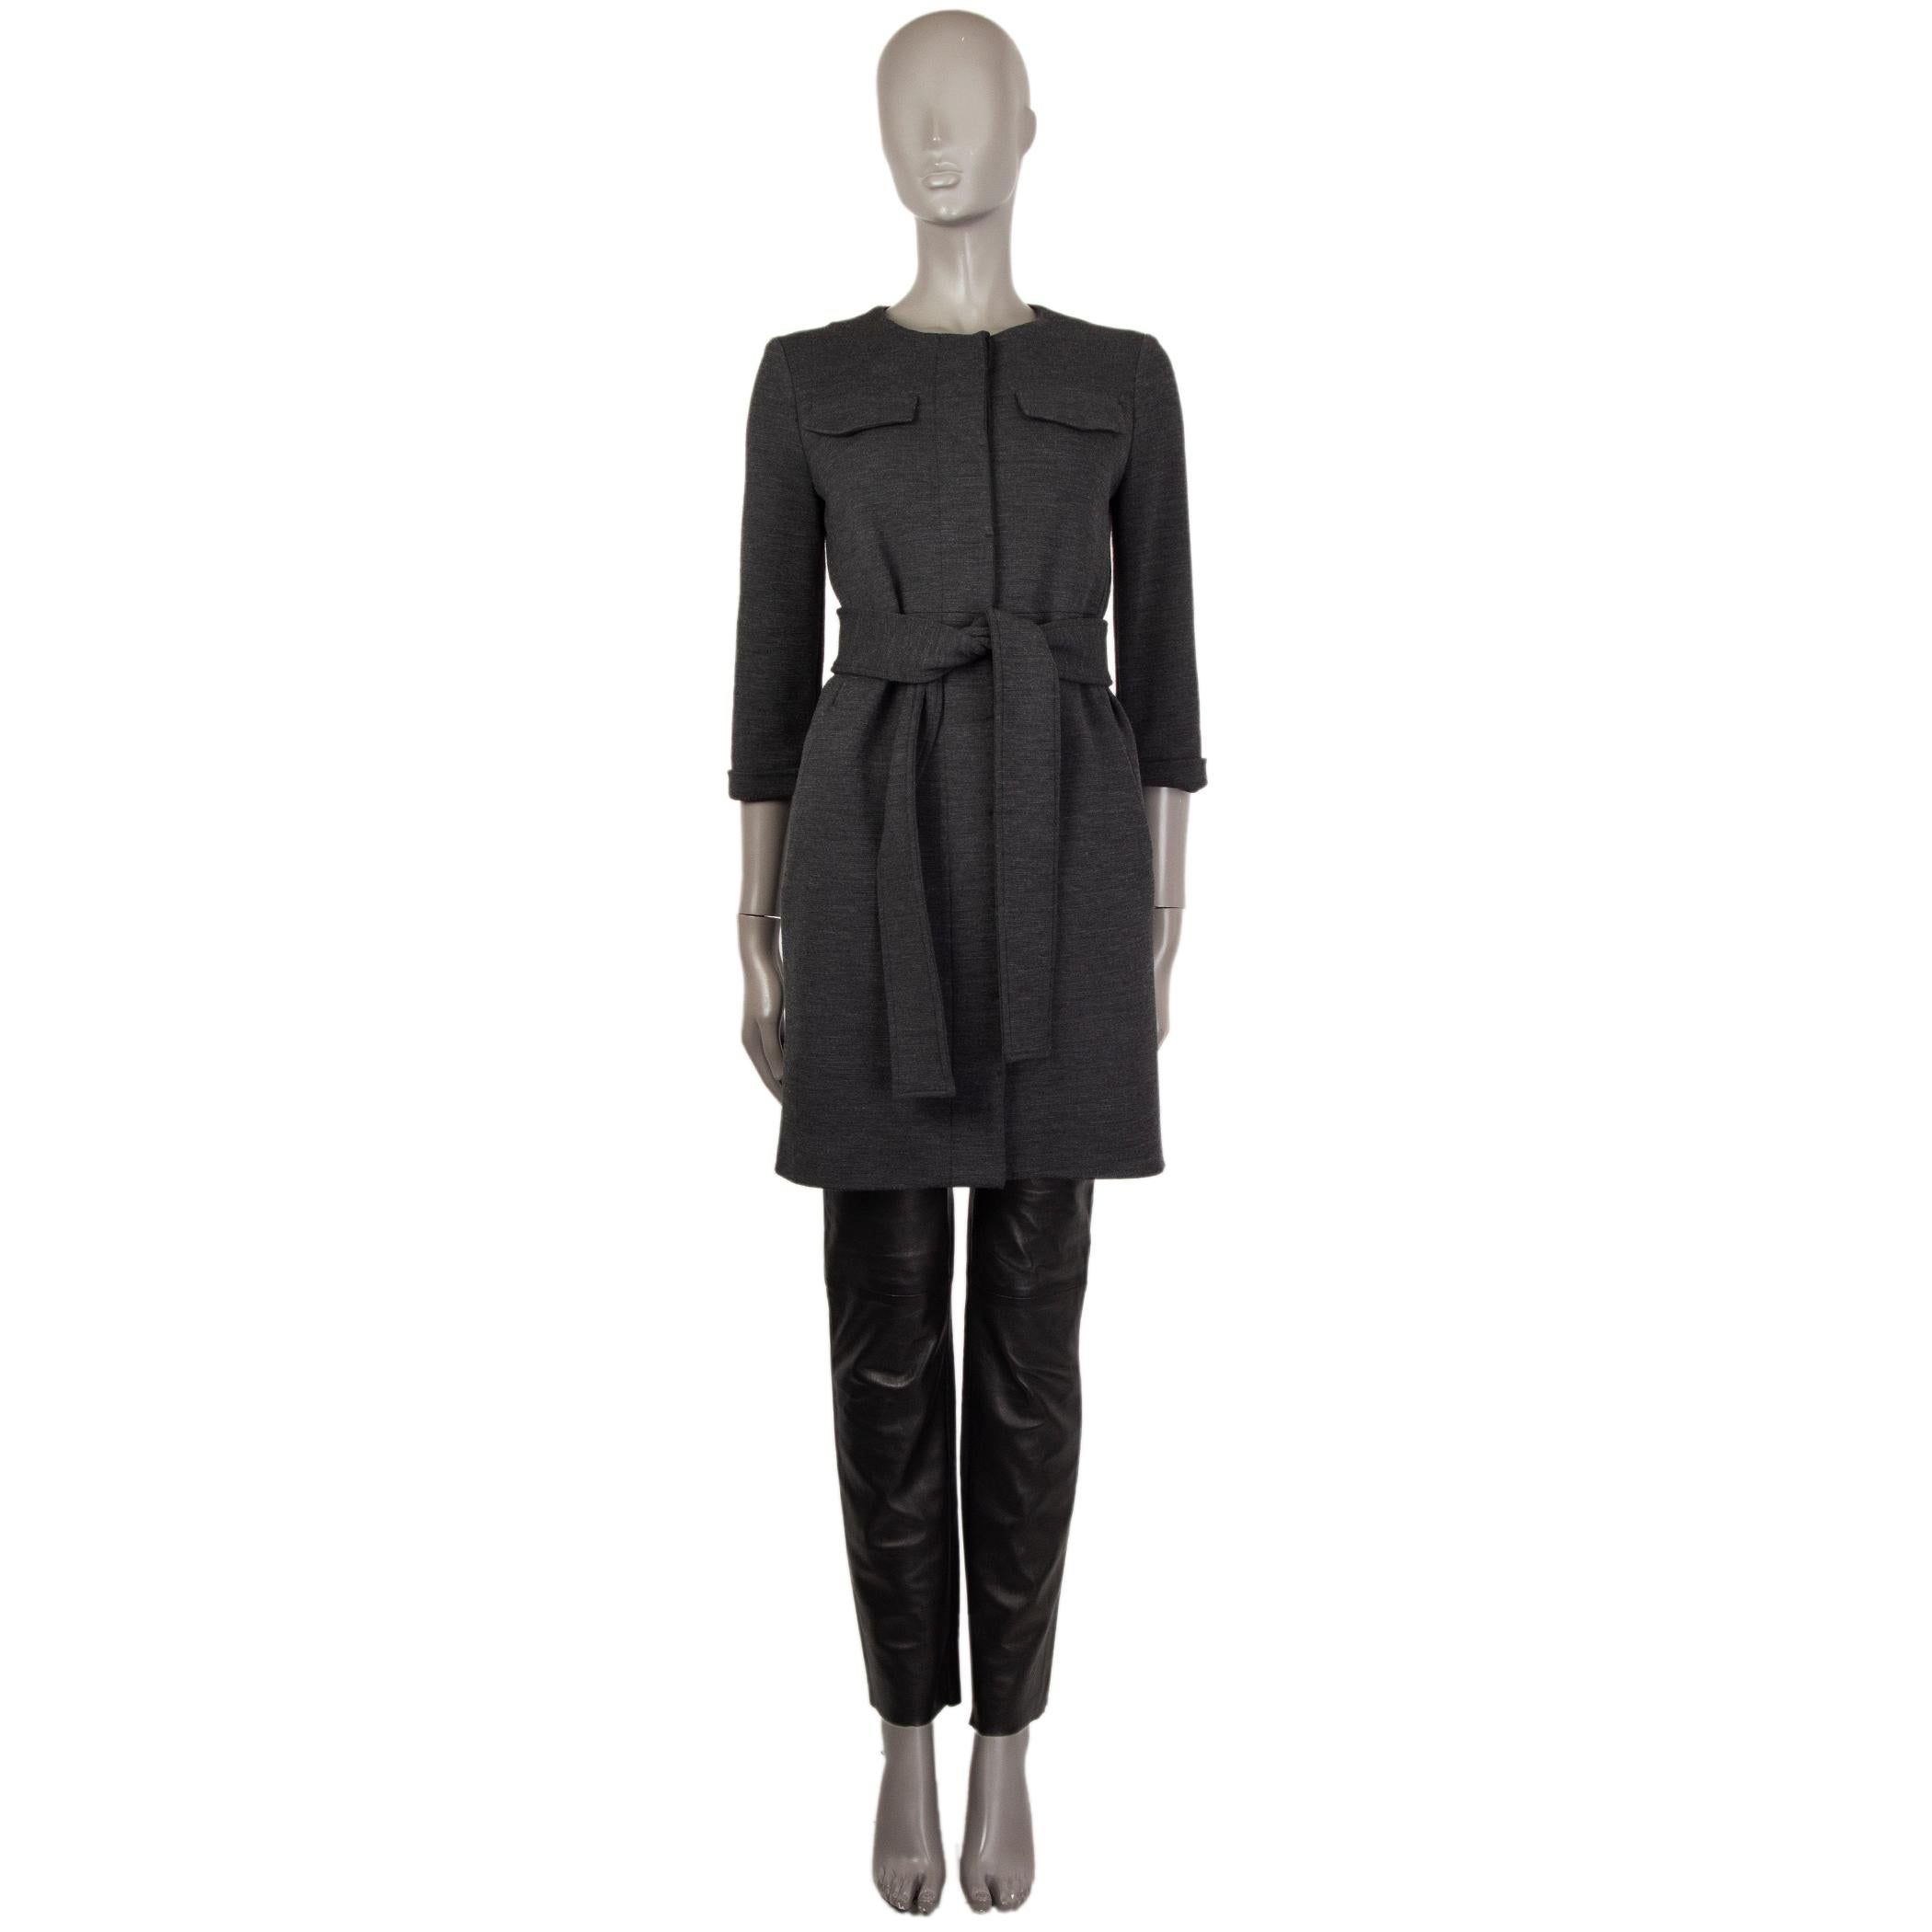 authentic Chloé collarless coat in charcoal wool (100%). With two flap pockets on the chest, two slit pockets on the sides, inverted pleat on the back, and folded cuffs. Closes with concealed button on the front. Lined in charcoal silk (100%). Comes